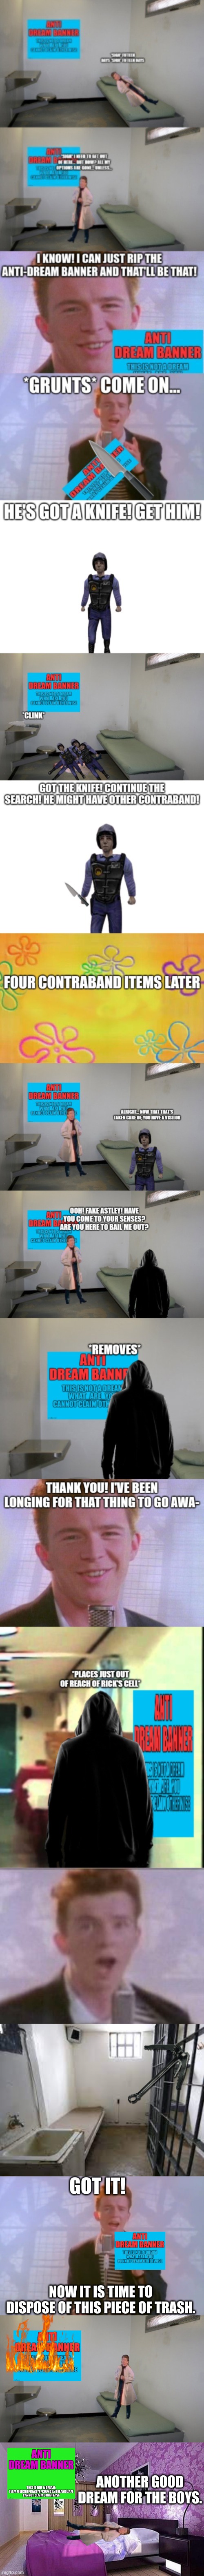 You may not keep Rick on death row anymore. | GOT IT! NOW IT IS TIME TO DISPOSE OF THIS PIECE OF TRASH. ANOTHER GOOD DREAM FOR THE BOYS. | image tagged in prison cell,rick astley,prison cell inside,pink bedroom | made w/ Imgflip meme maker